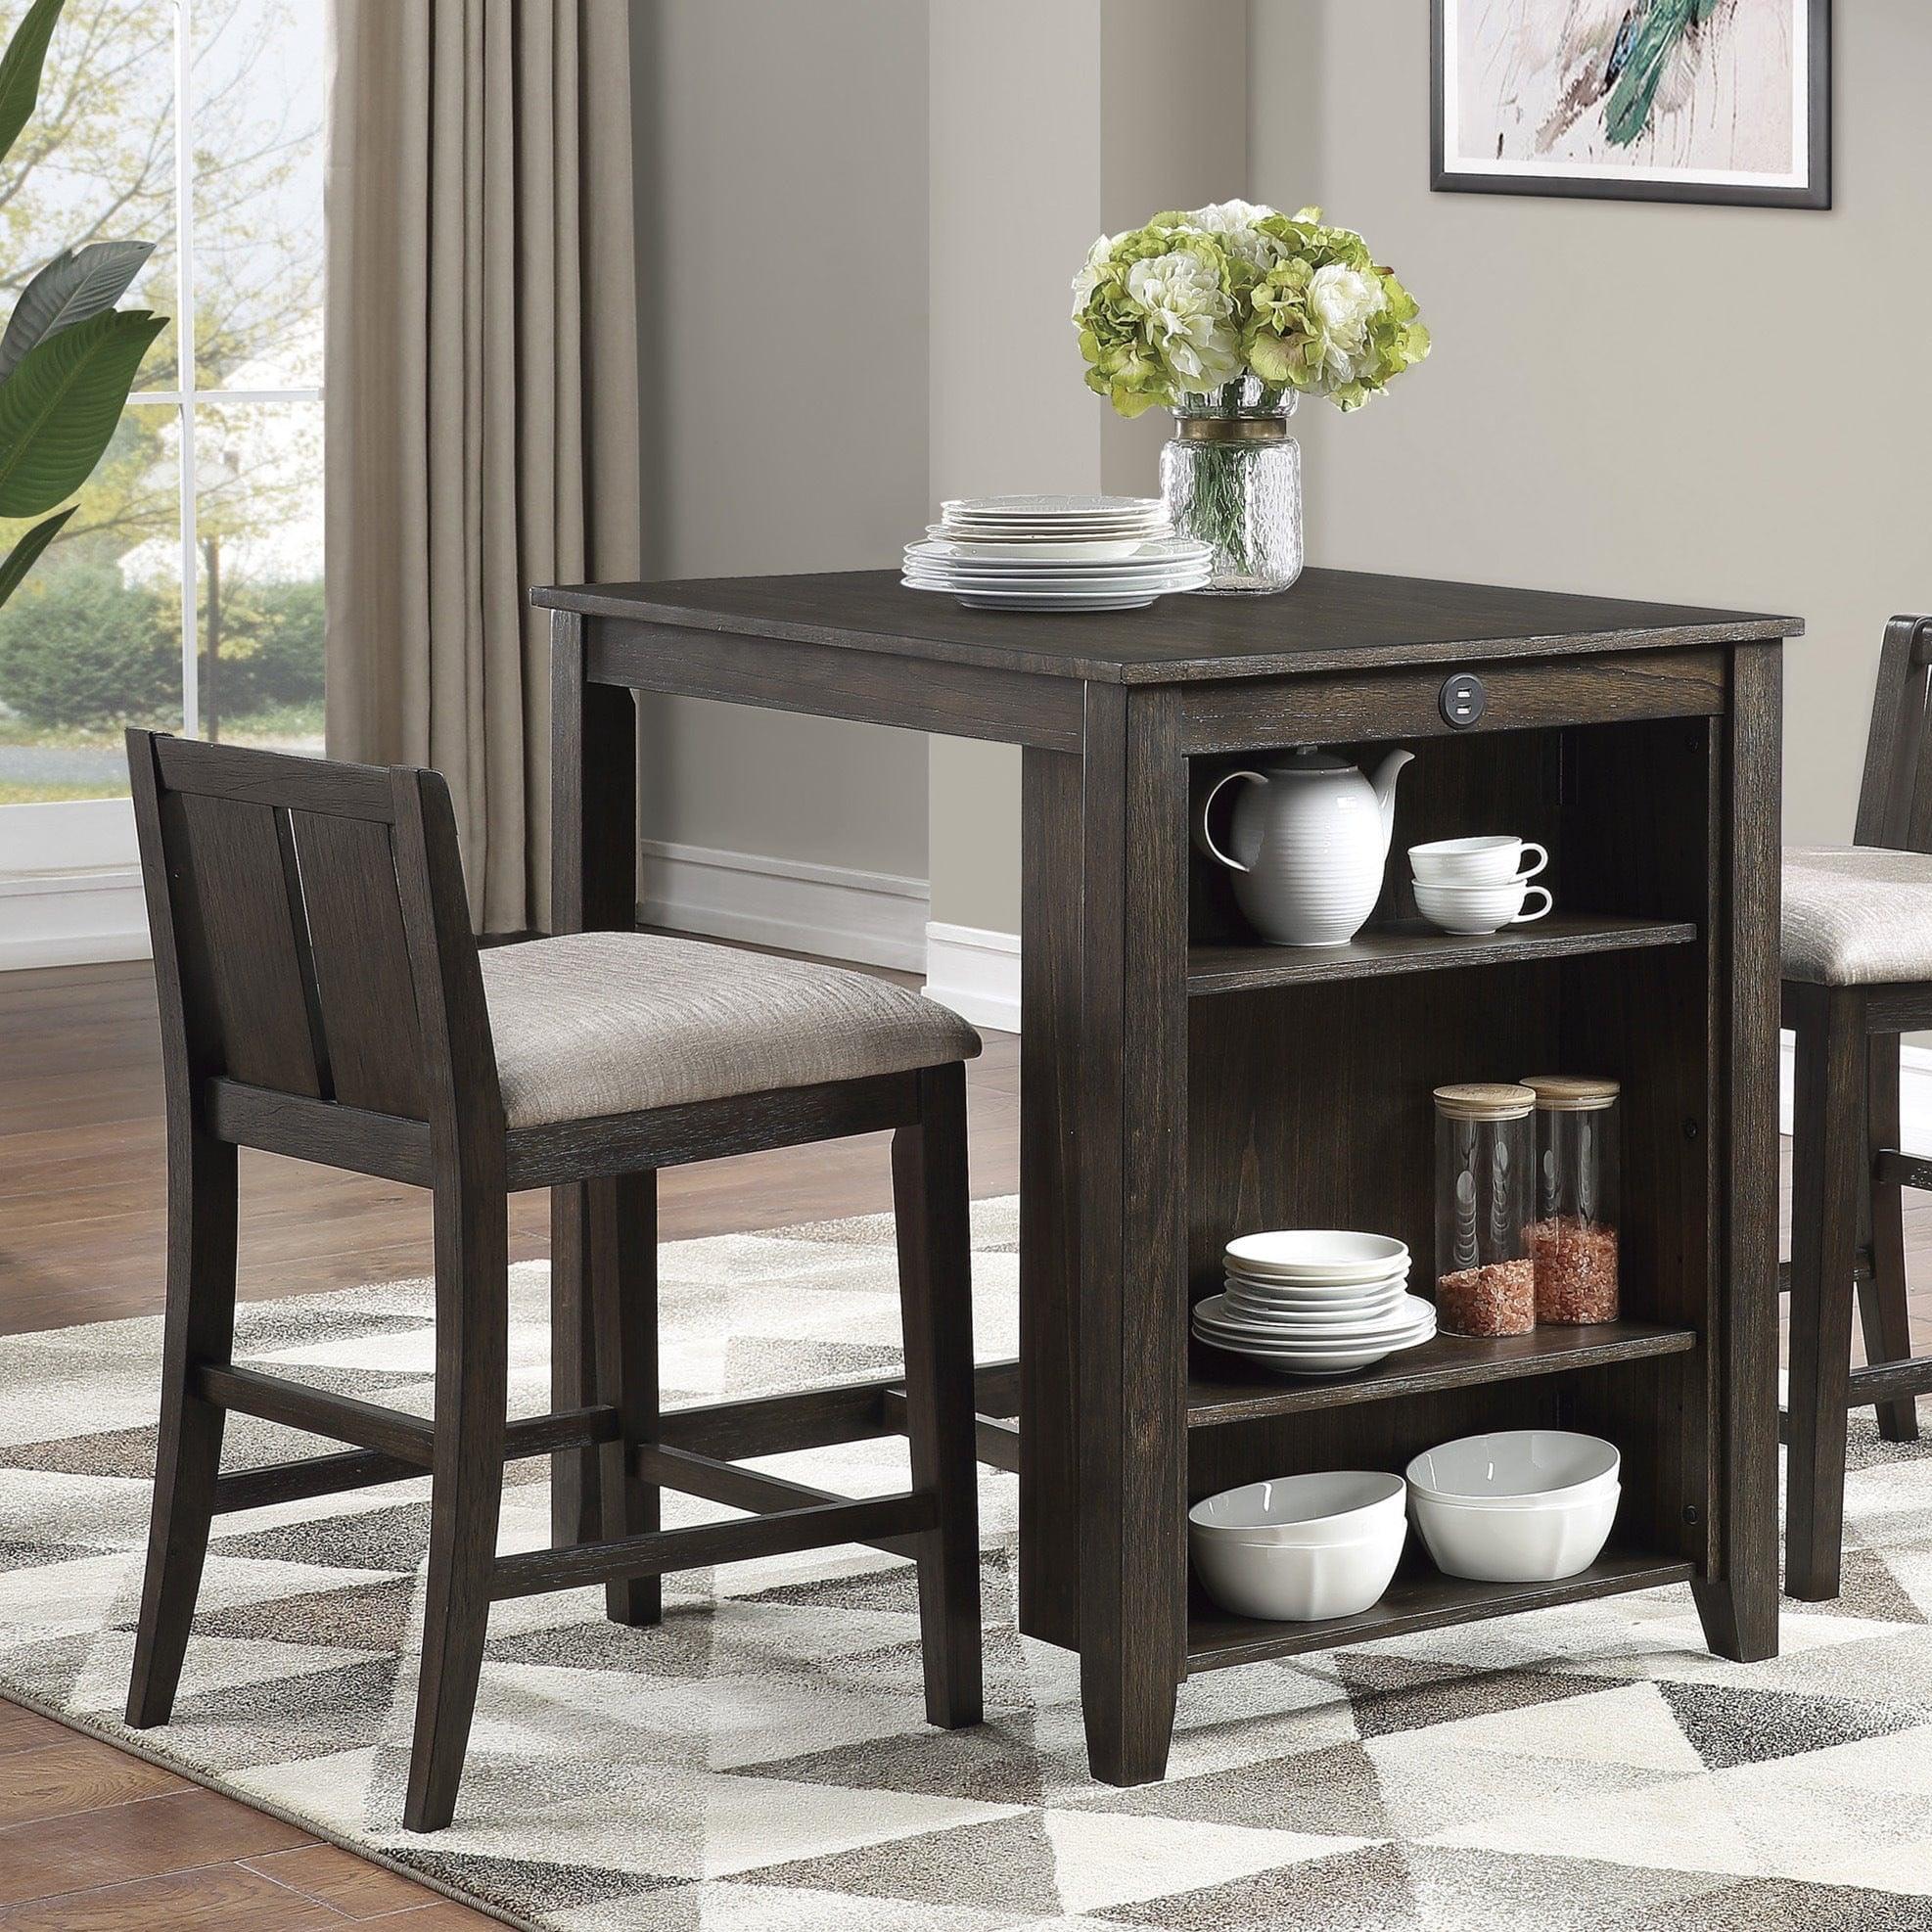 Shop Transitional Design Dark Cherry Finish 3-piece Pack Counter Height Set Table w Display Shelf USB ports and 2x Counter Height Chairs Fabric Upholstered Dining Furniture Mademoiselle Home Decor